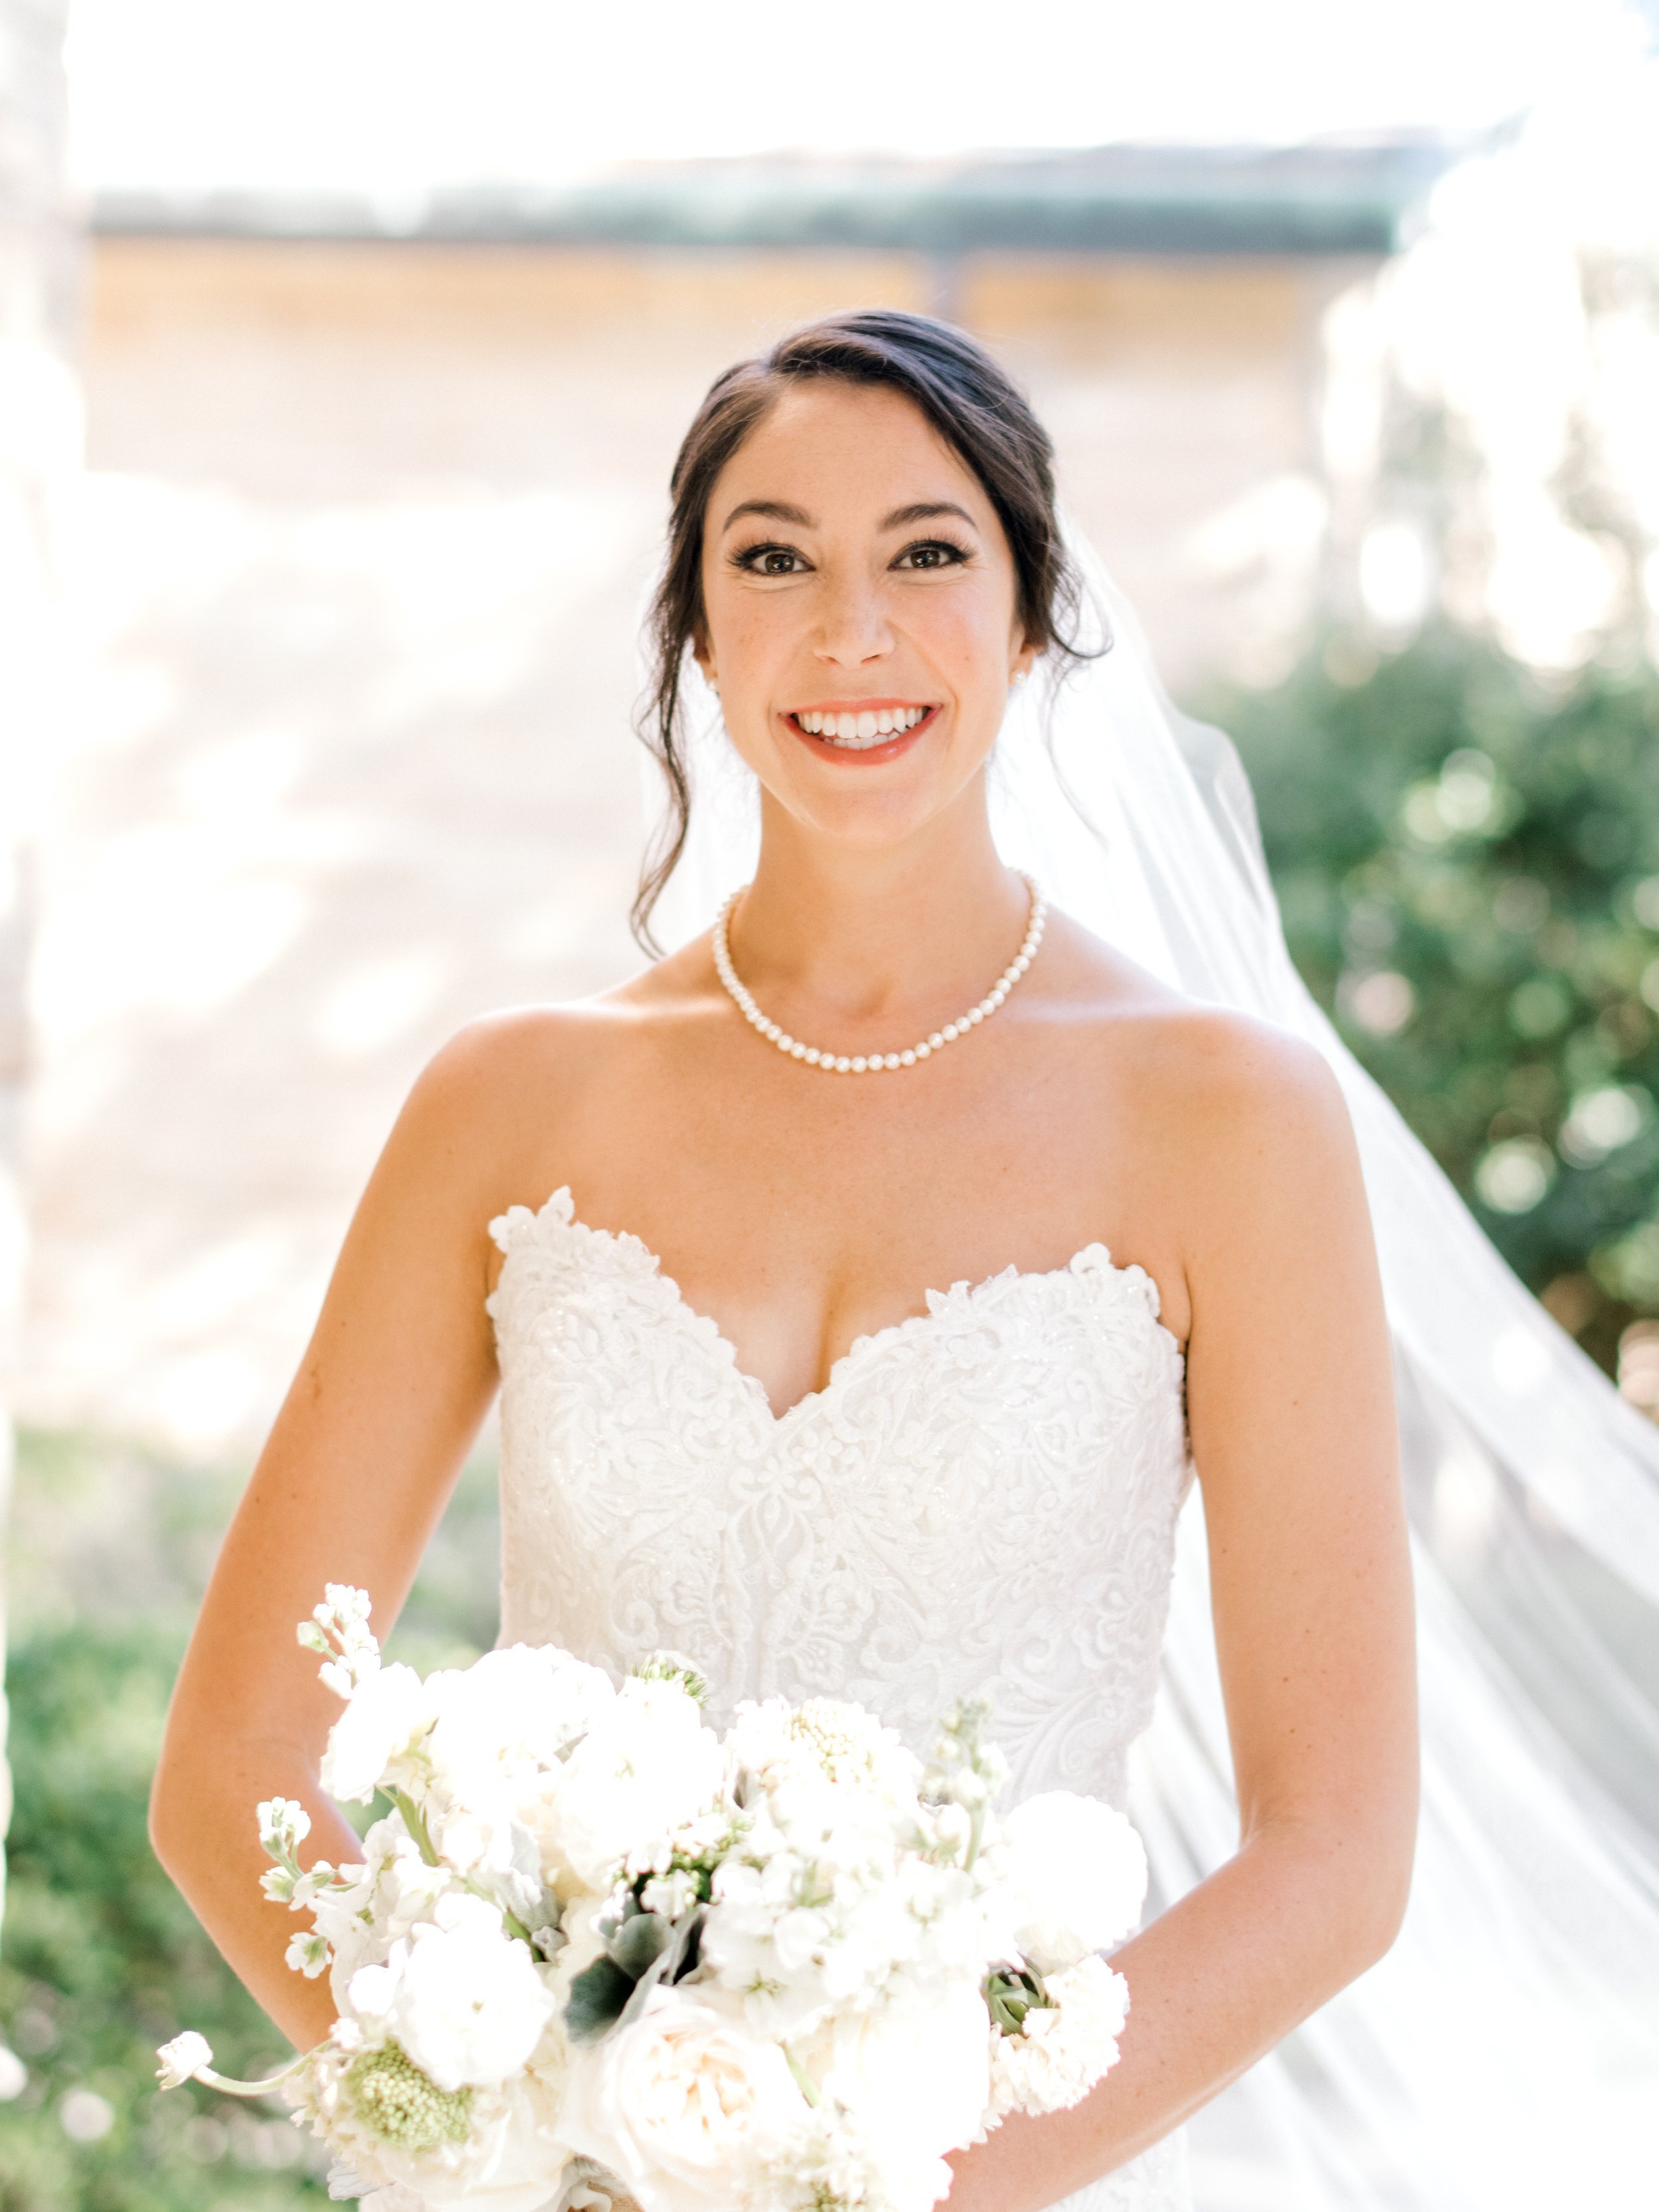 ivory-and-beau-blog-down-for-the-gown-grayson-real-bride-real-wedding-blog-southern-bride-maggie-sottero-wedding-dress-bridal-gown-wedding-gown-bridal-shop-bridal-boutique-savannah-georgia-Pinyan_0393.jpg